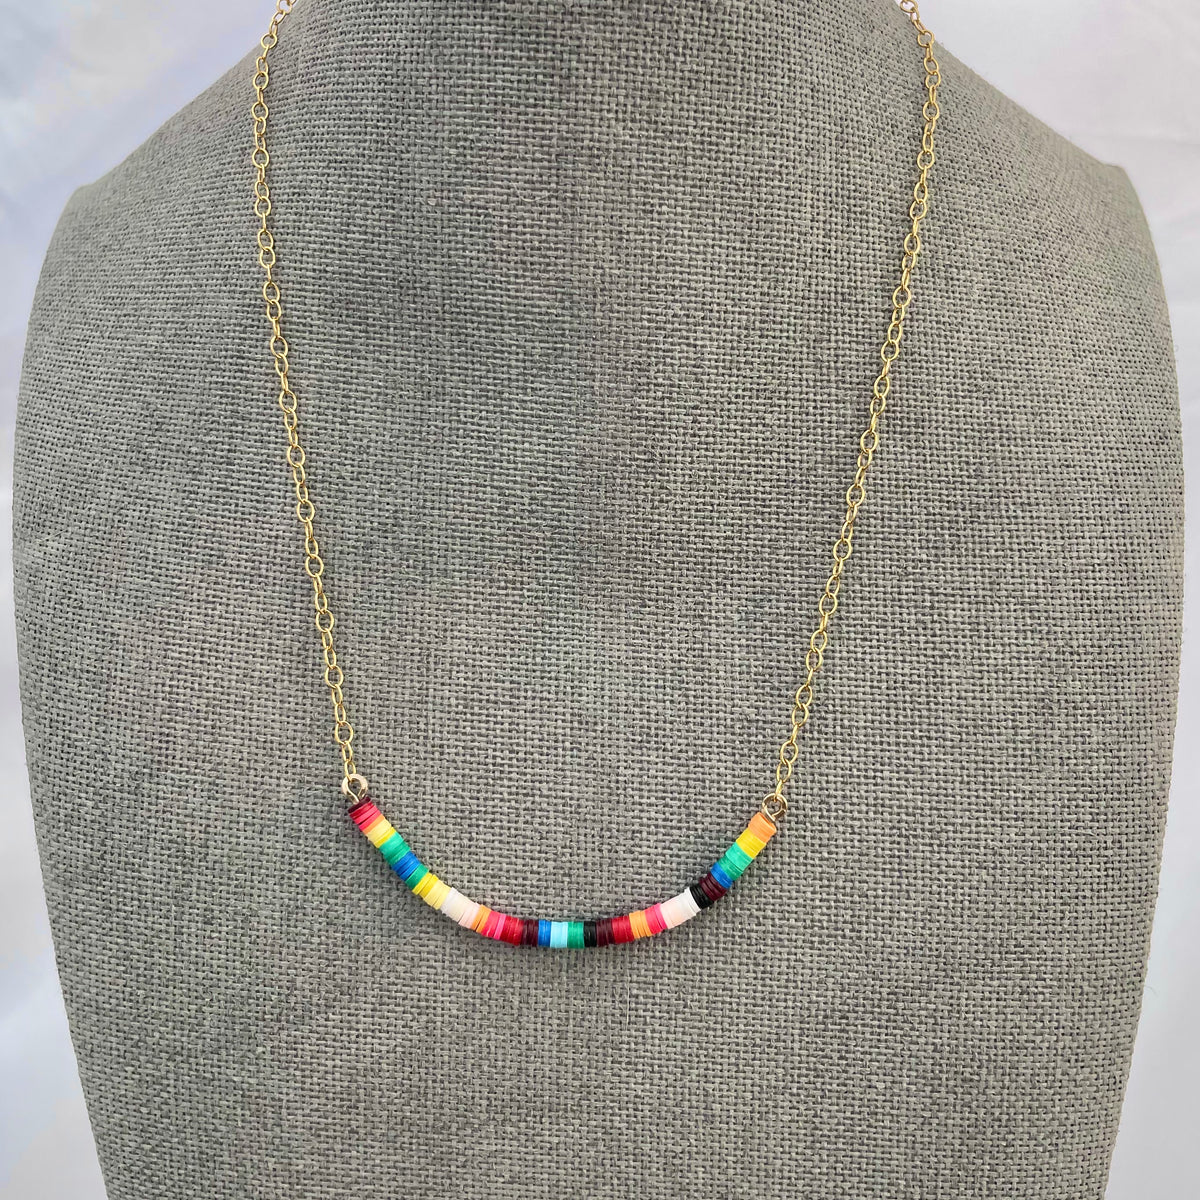 Multicolored Necklace IV / 14K Gold-Filled